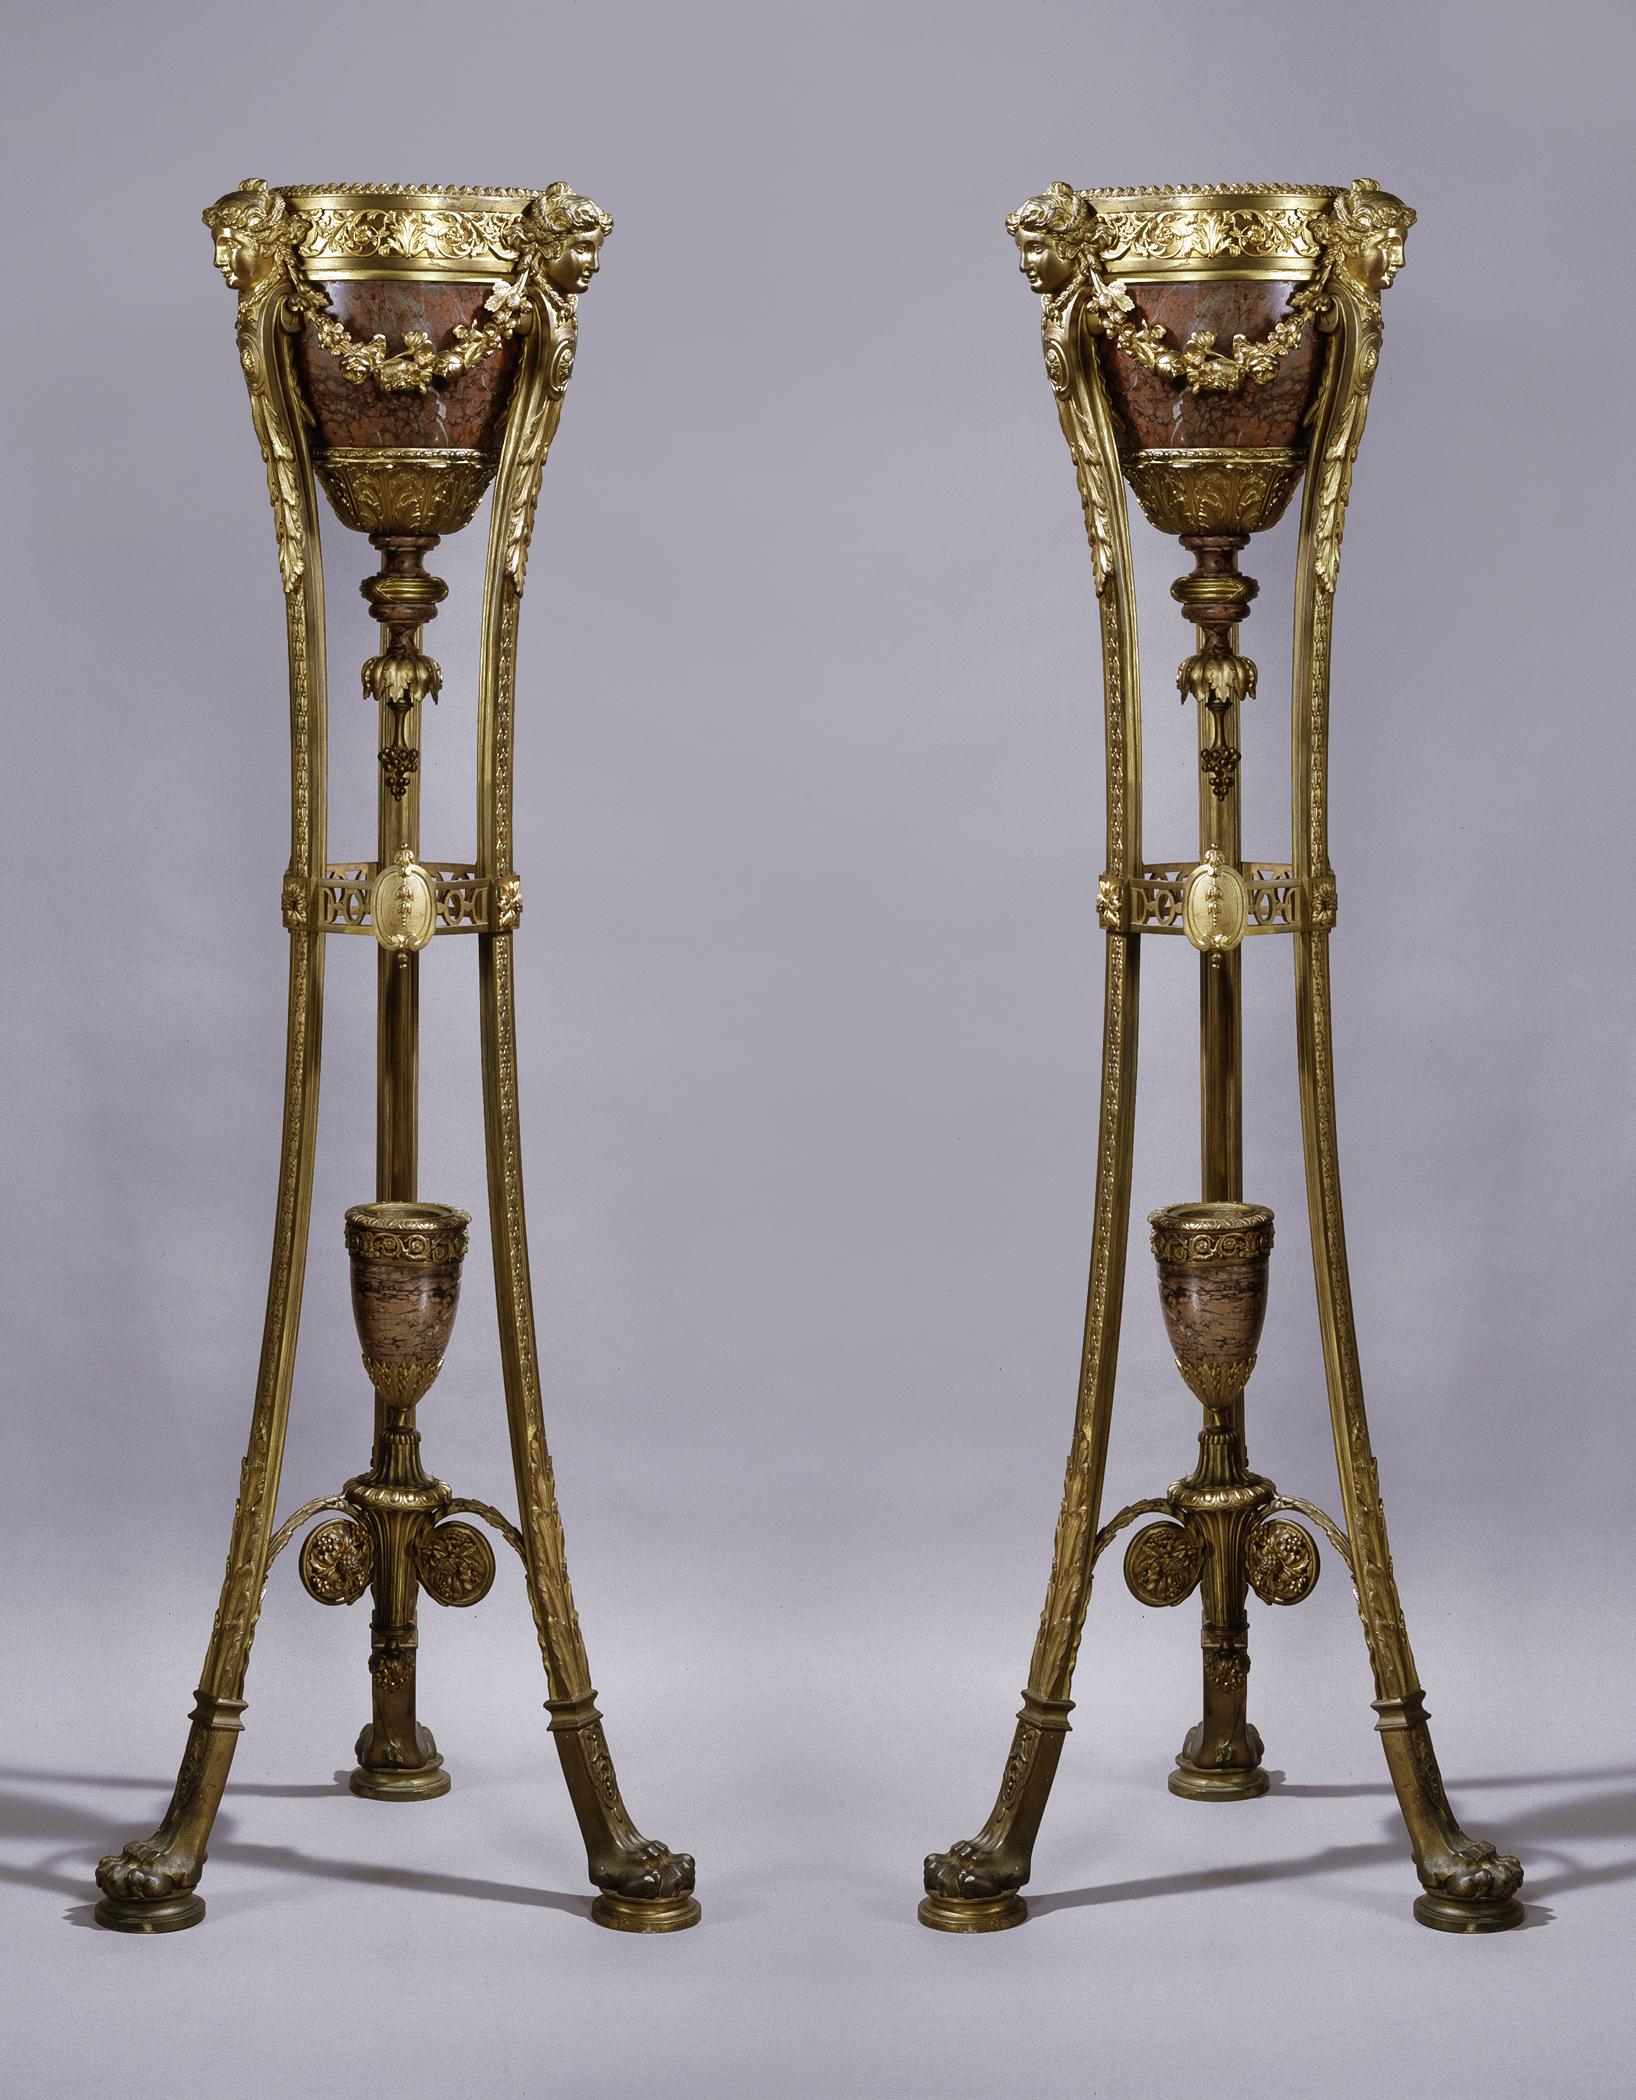 A very fine pair of Regence style gilt bronze and Rouge Griotte marble jardinières on stands. 

French, circa 1870.

Each jardinière has a scrolling foliate frieze above a tapering rouge Griotte marble urn with acanthus cast lower section, with